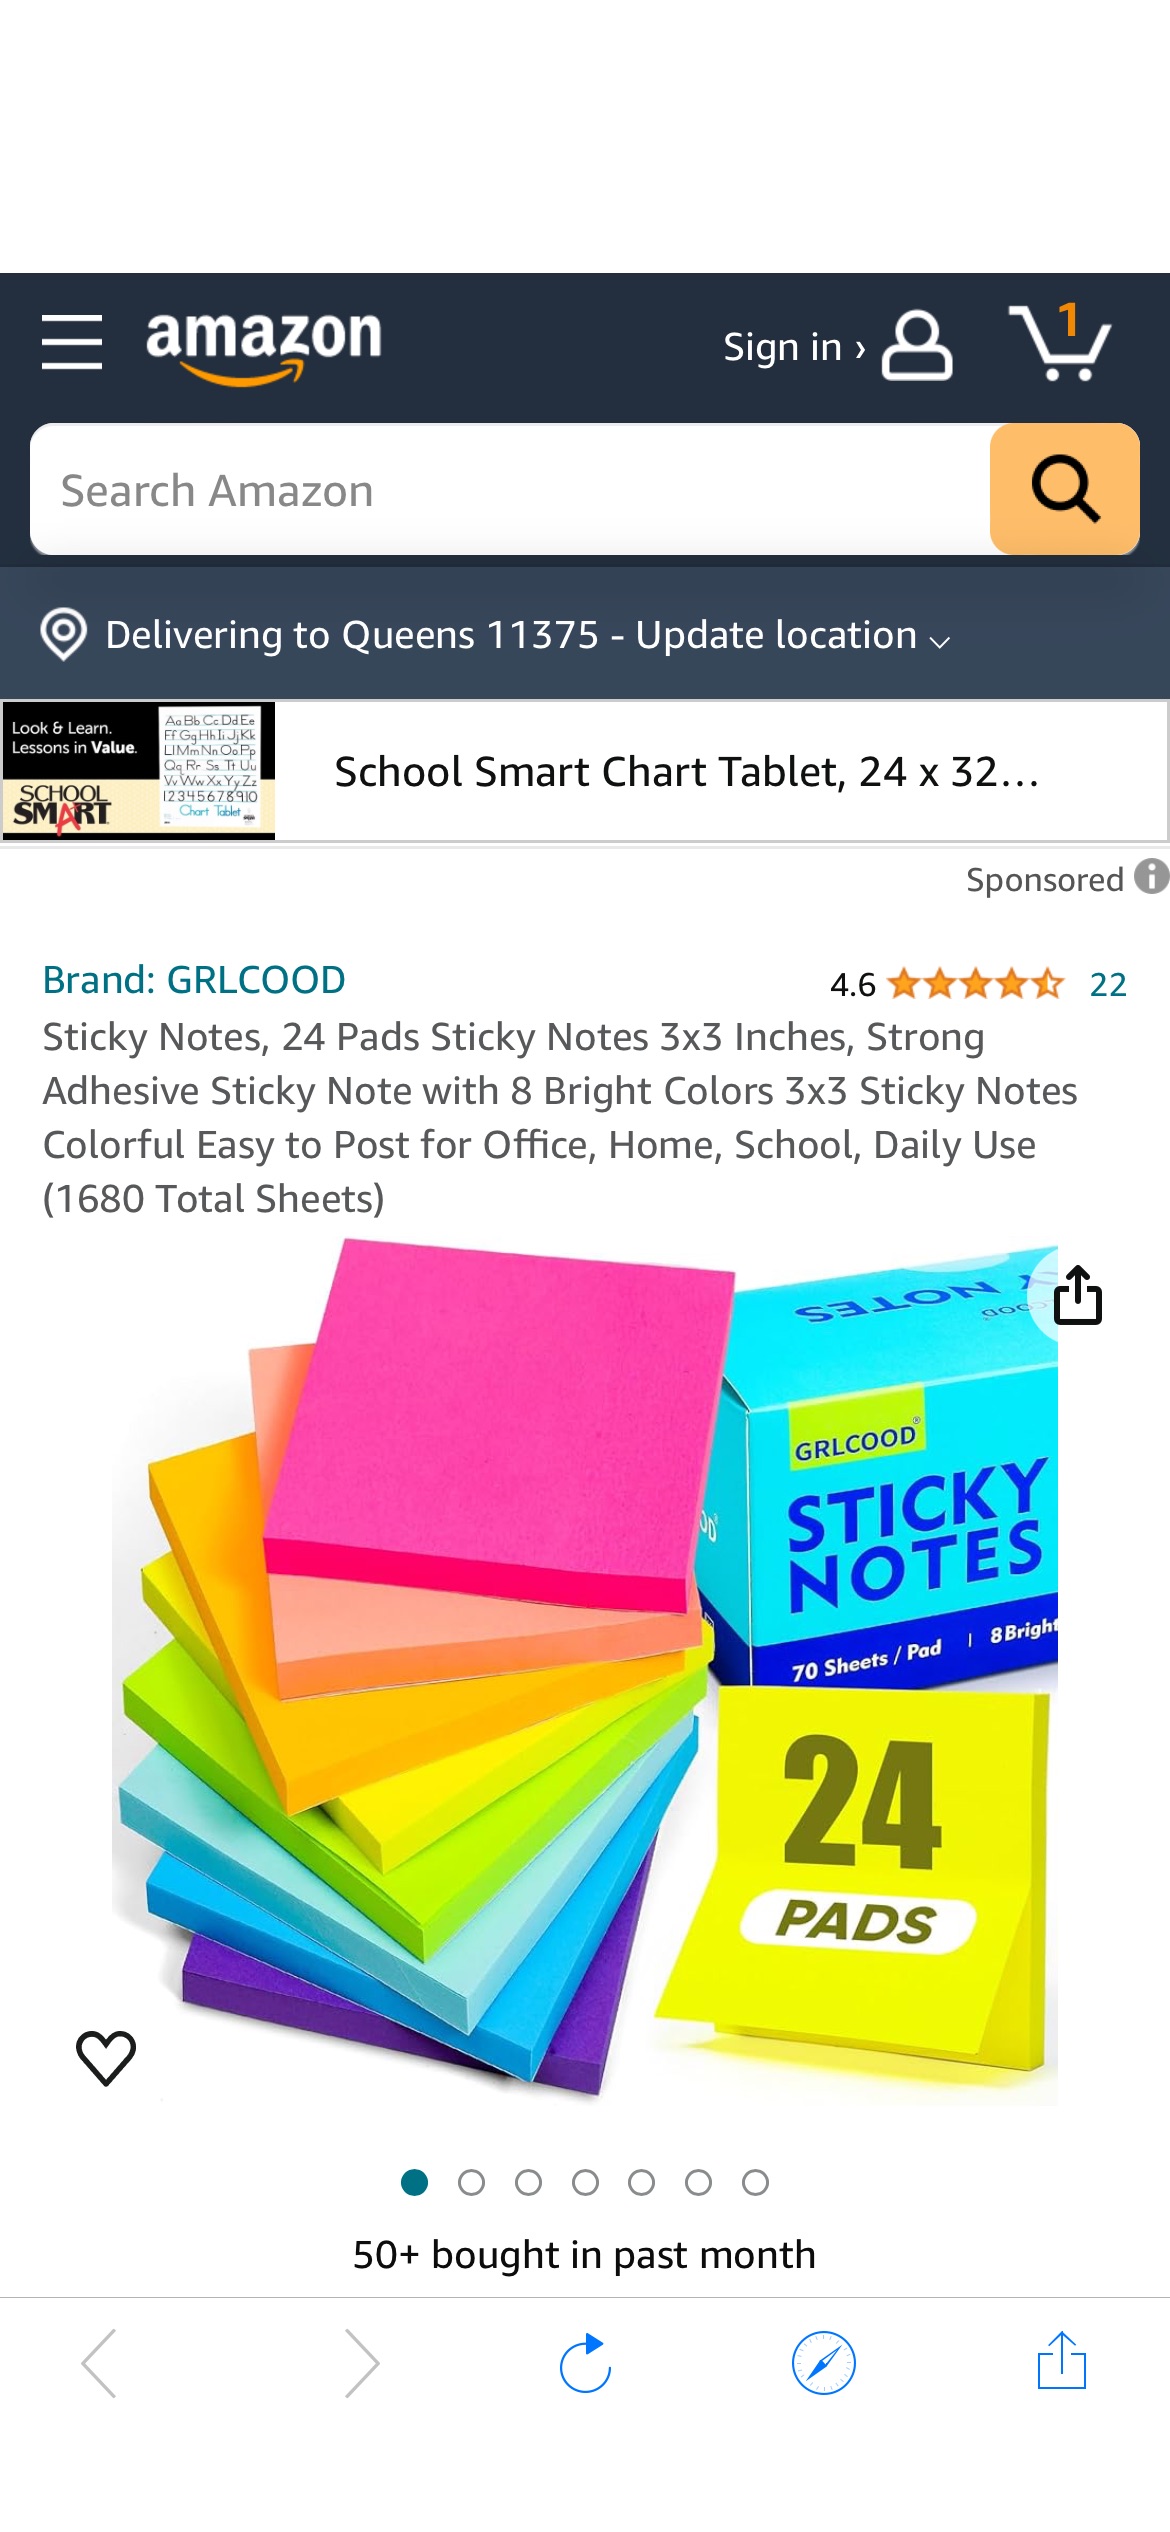 Amazon.com : Sticky Notes, 24 Pads Sticky Notes 3x3 Inches, Strong Adhesive Sticky Note with 8 Bright Colors 3x3 Sticky Notes Colorful Easy to Post for Office, Home, School, Daily Use (1680 Total Shee